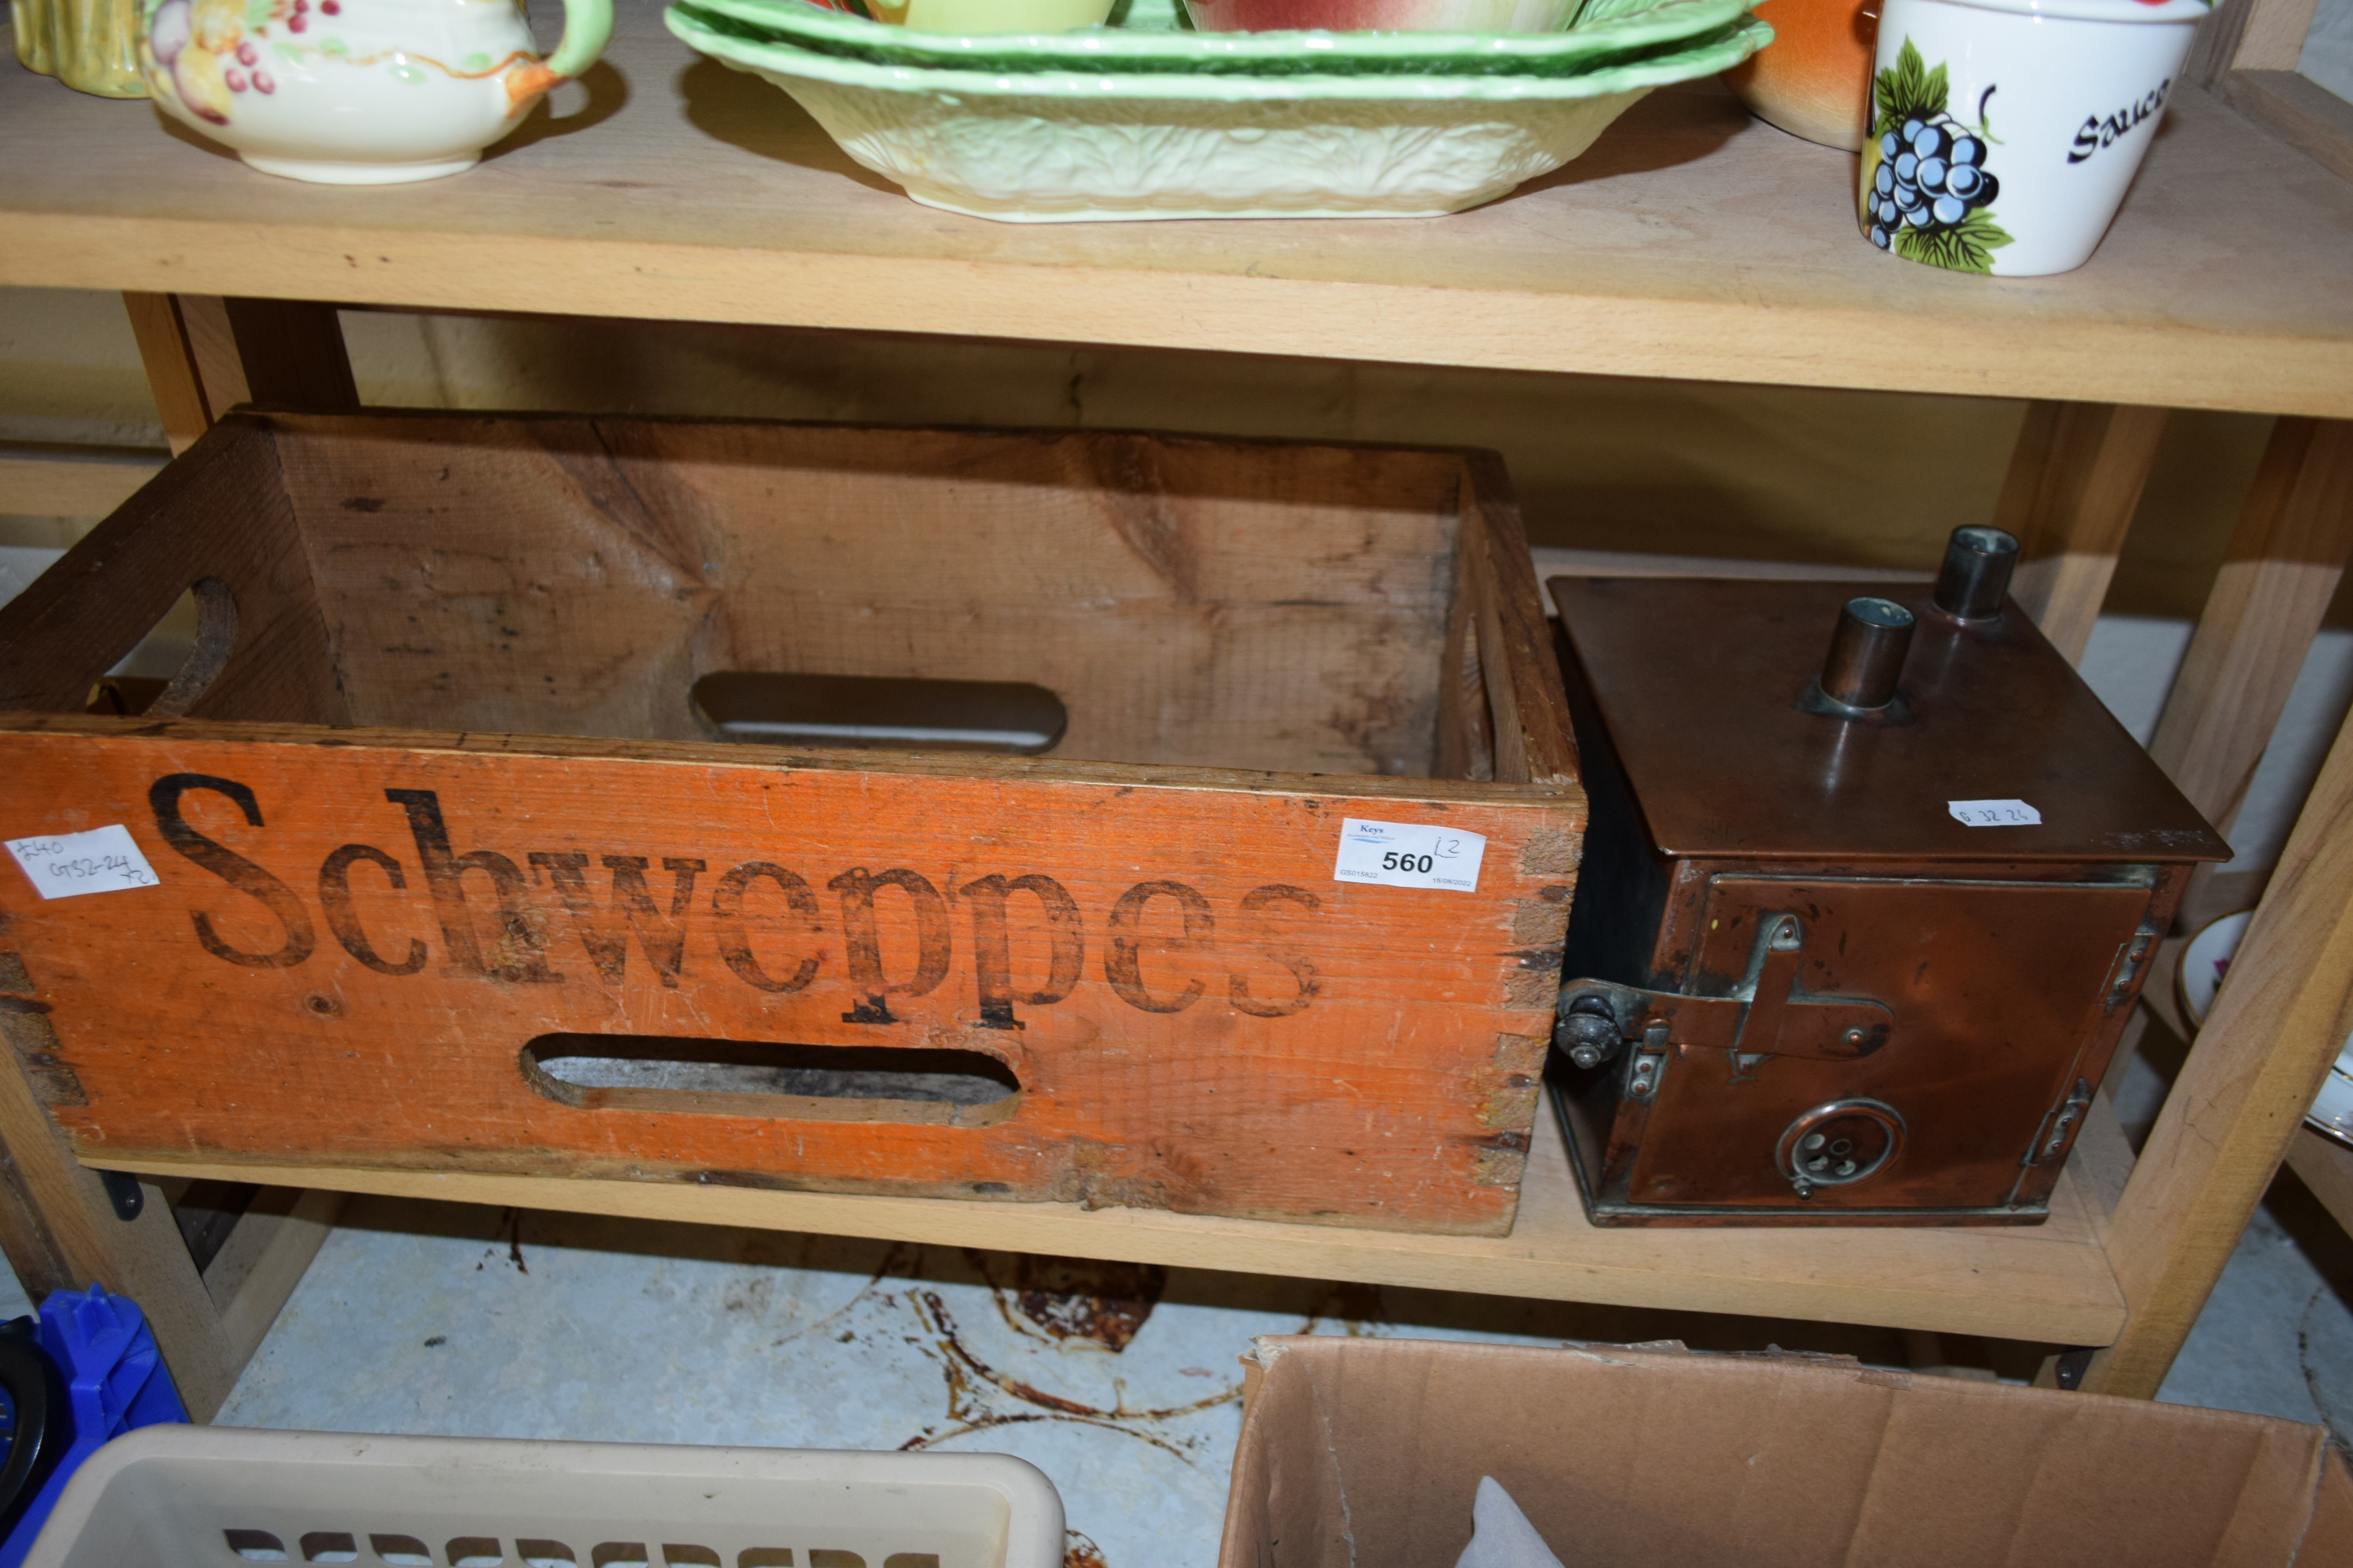 SMALL COPPER OVEN OR STERILISER OF SQUARE FORM, TOGETHER WITH A SCHWEPPES WOODEN BOTTLE CRATE - Image 2 of 2